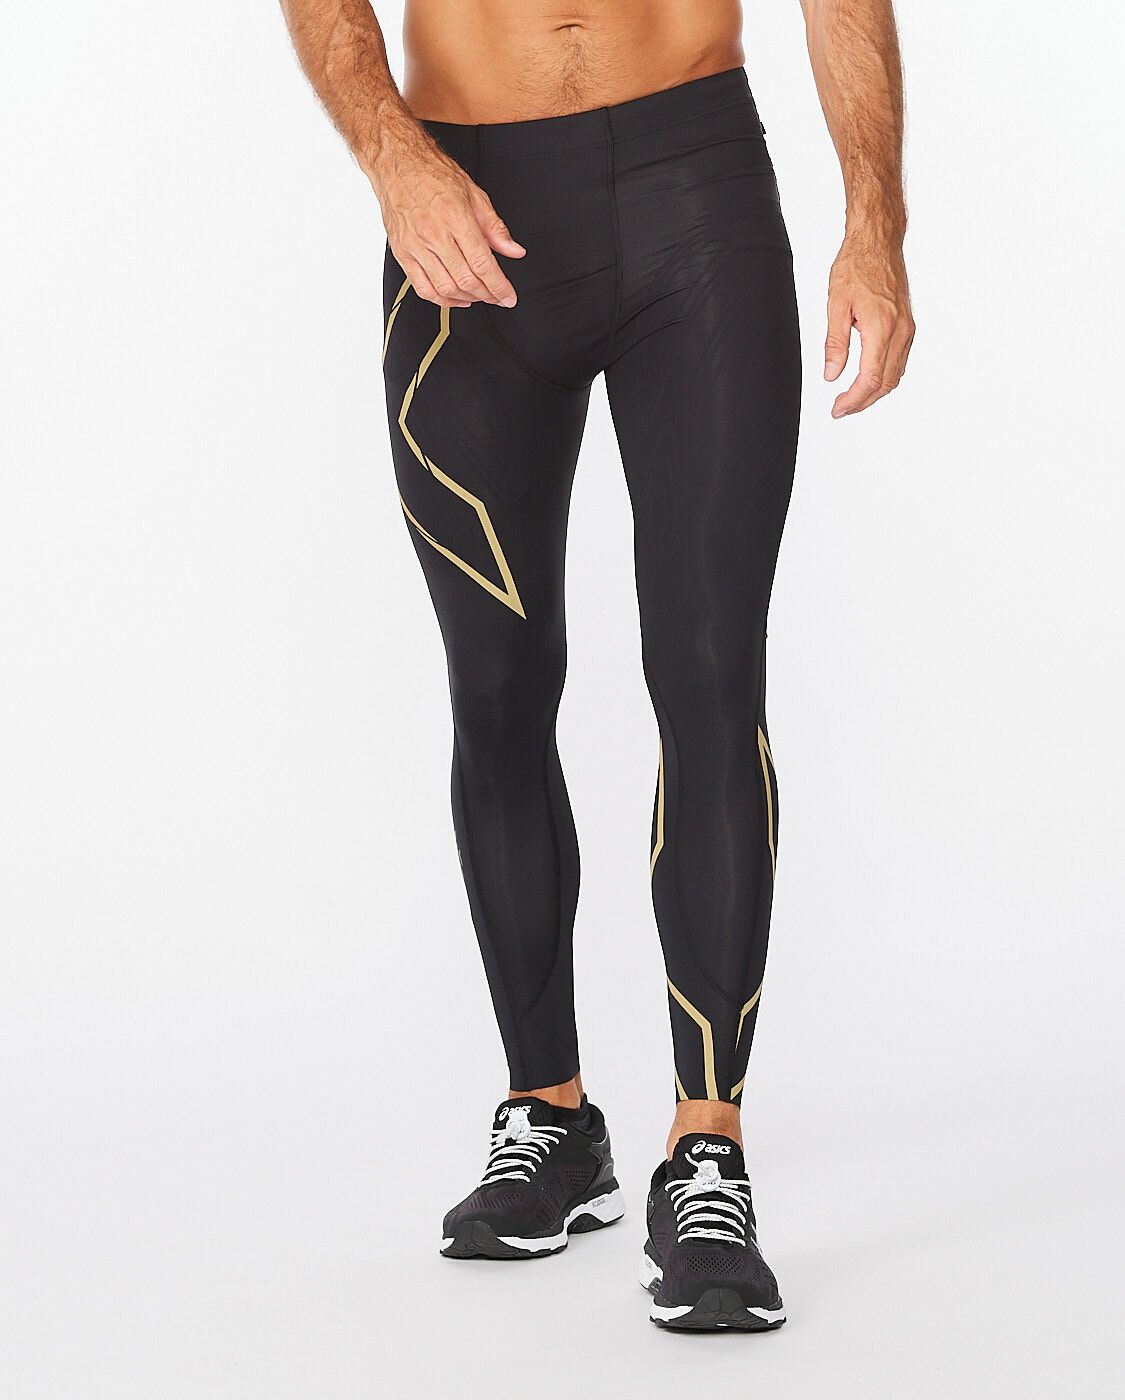 2xu compression men products for sale